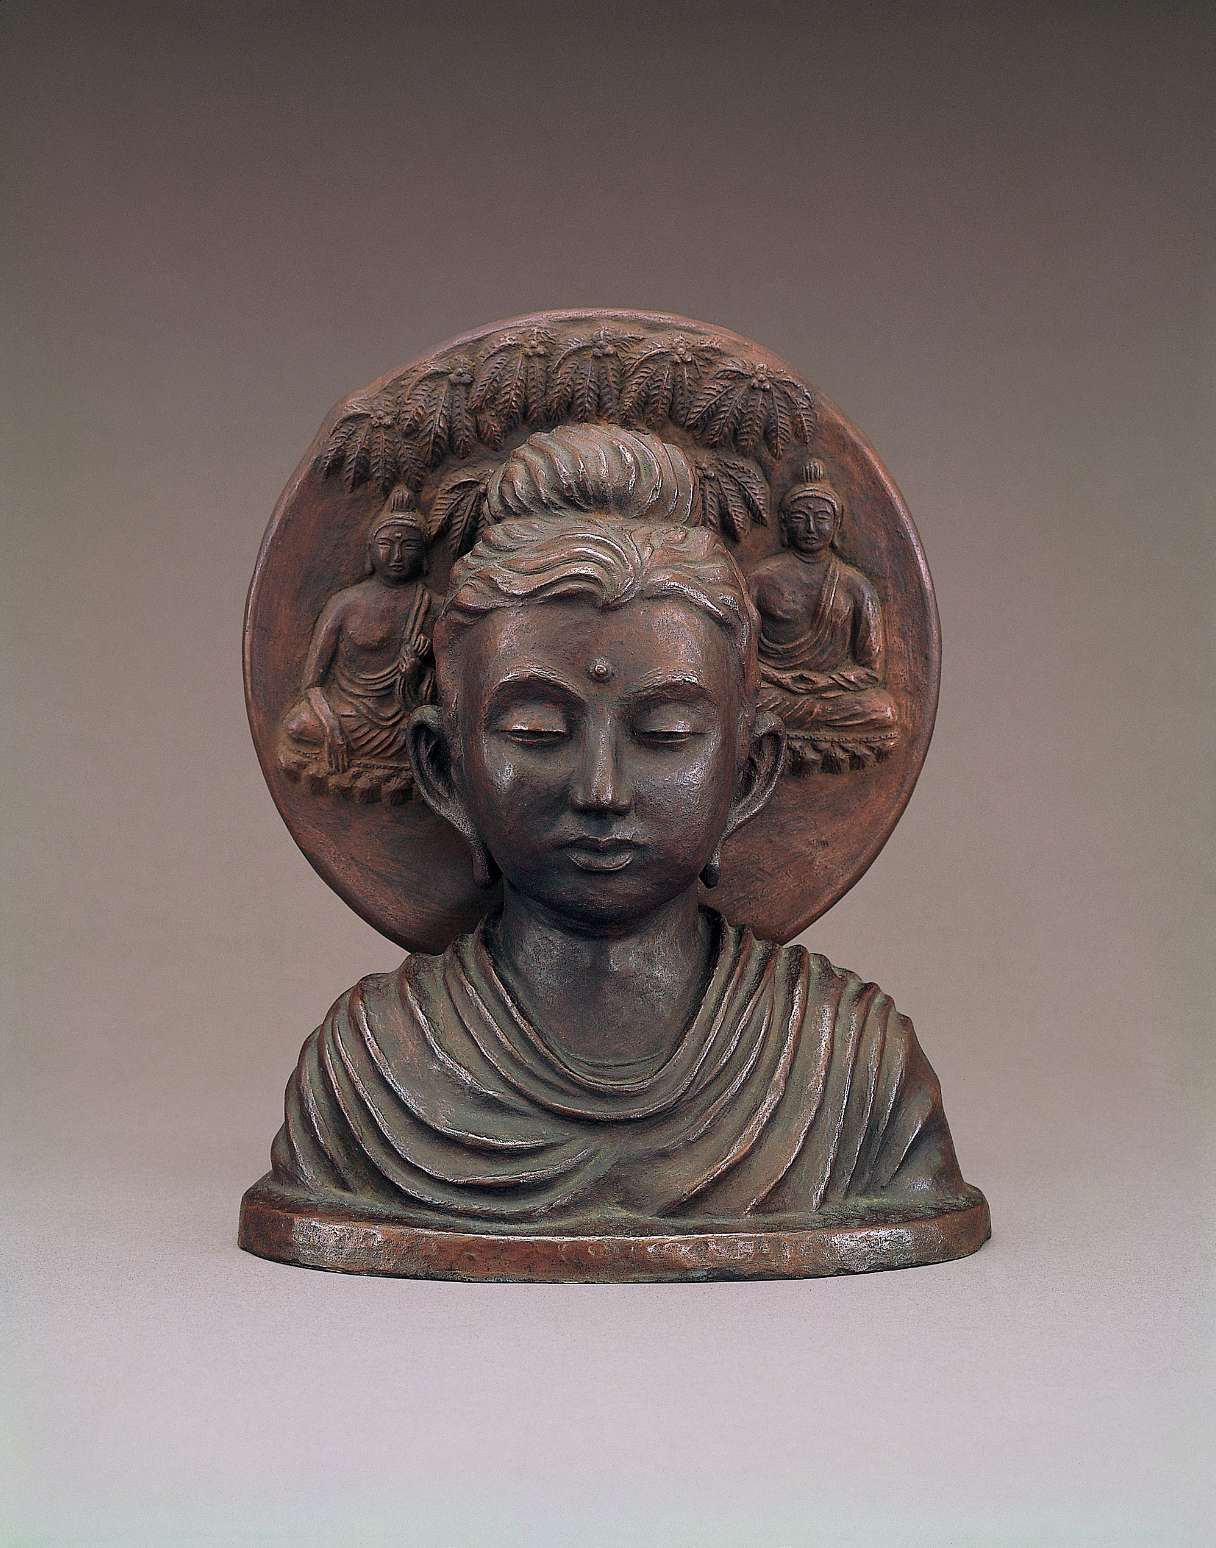 A matte, brown hued bust of Buddha with a plump, youthful face, eyes slightly closed in meditation, backed by a circular nimbus showing a decorative leafy canopy and two seated buddhas.